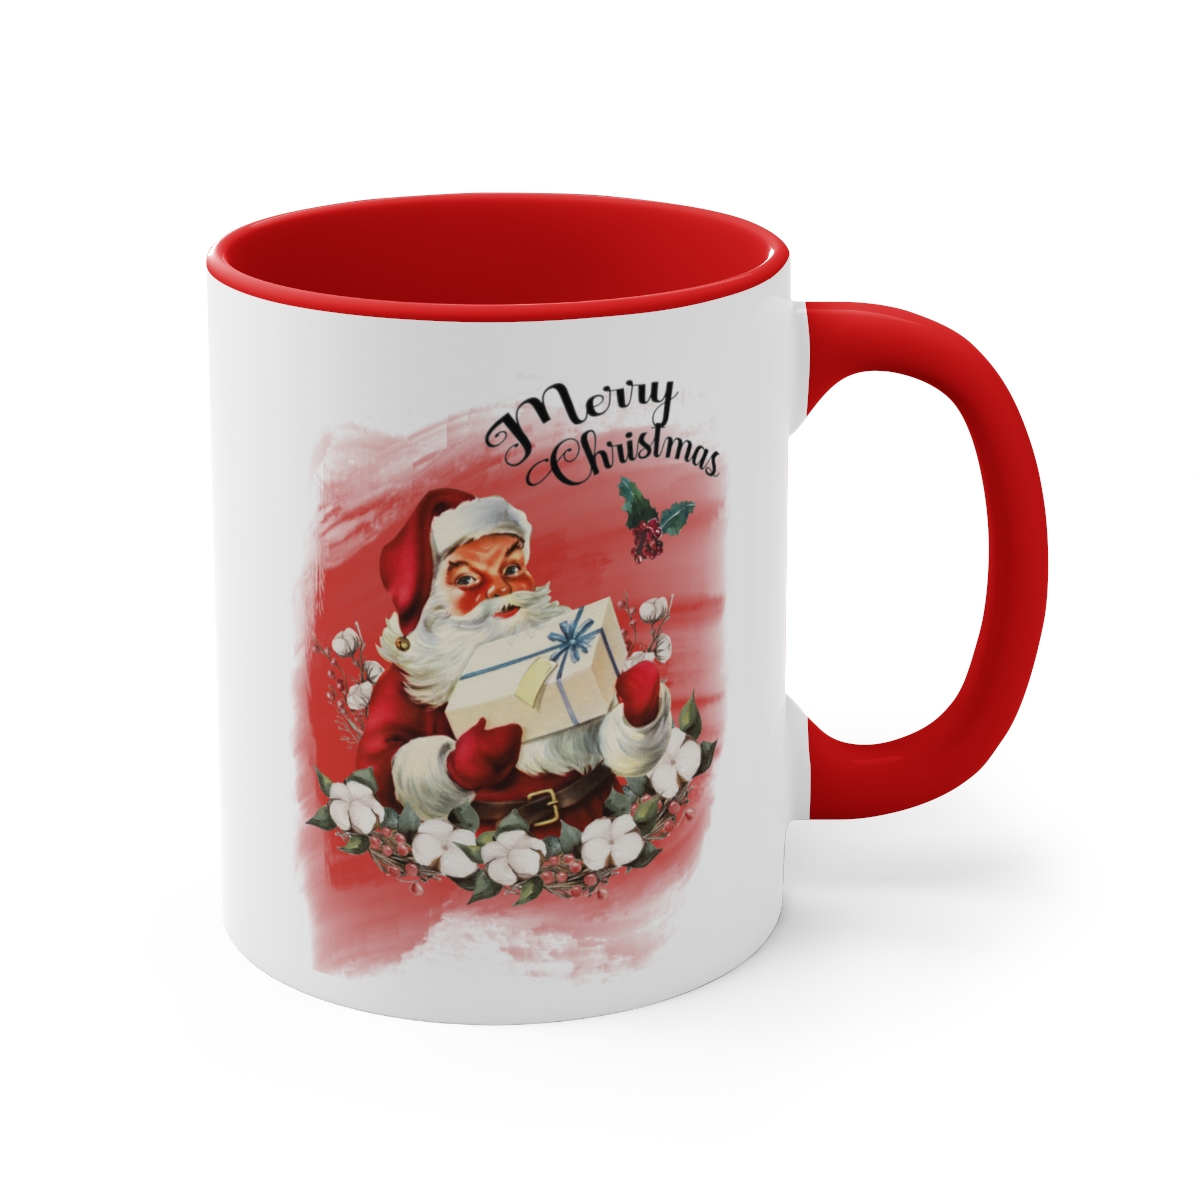 Christmas Santa mug that can be a personalized accent mug in red. Santa with gift